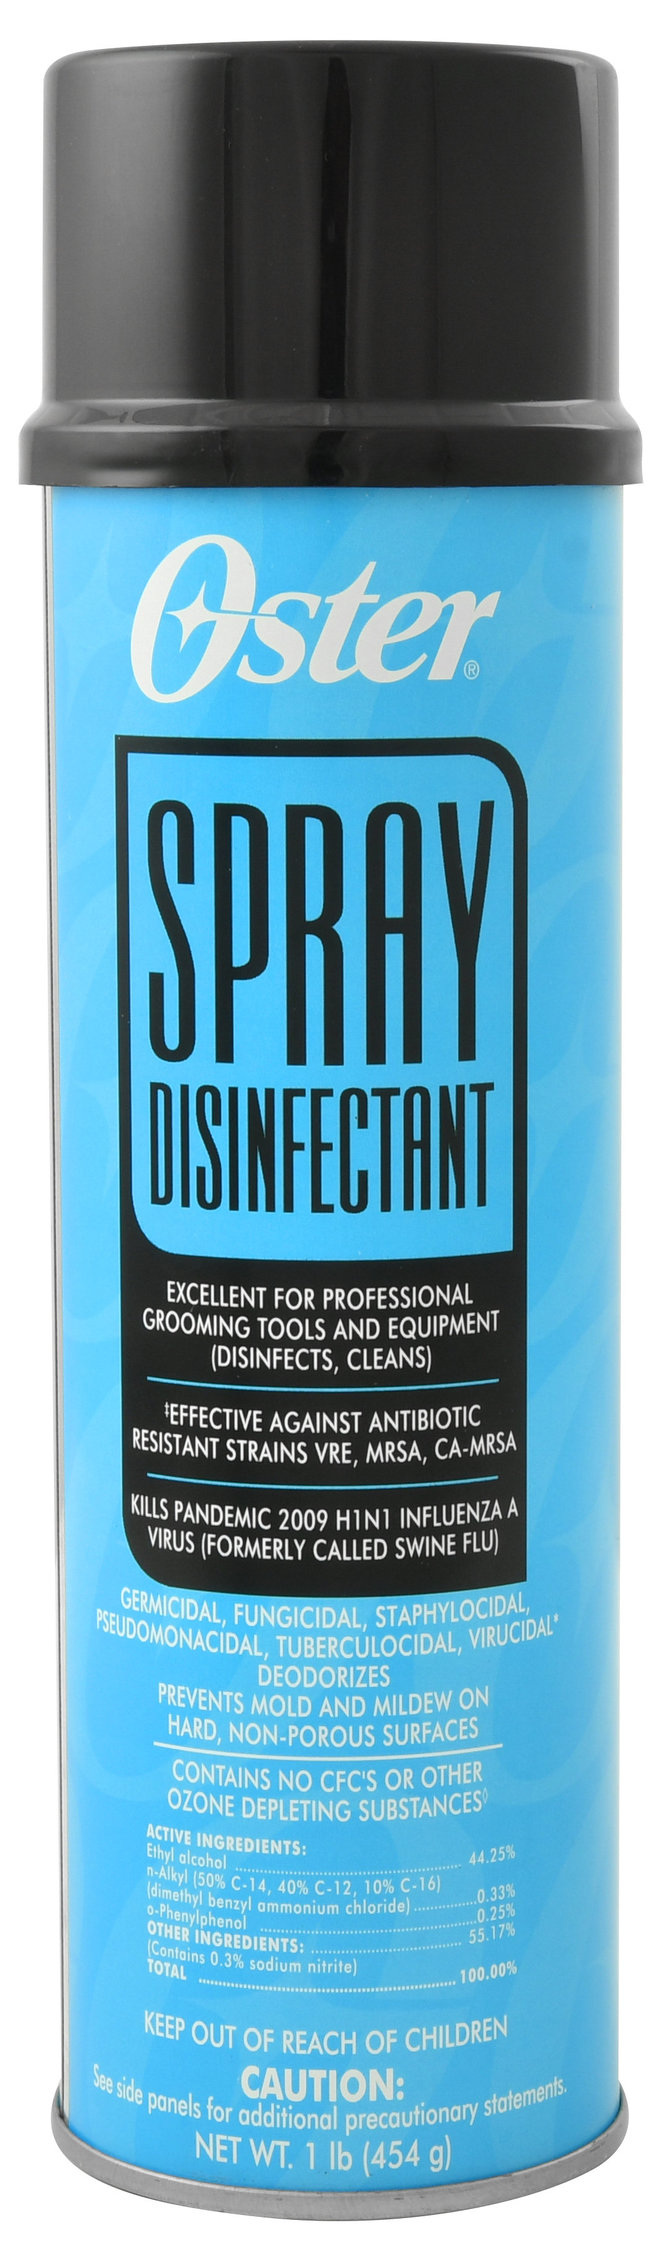 OSTER DISINFECTANT 16OZ